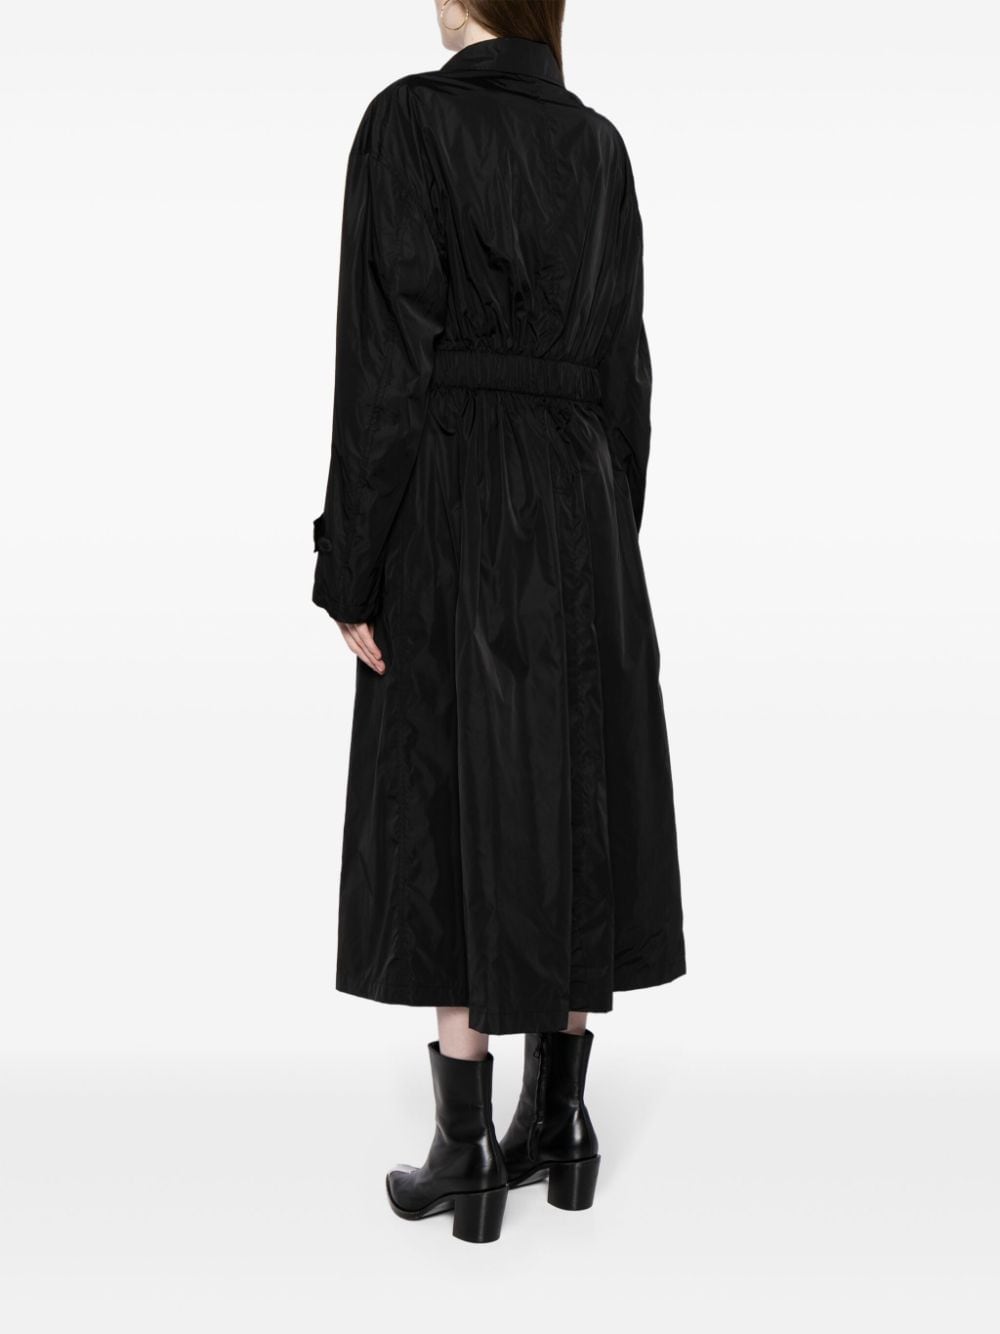 Alexander Wang Belted Trench Coat - Farfetch